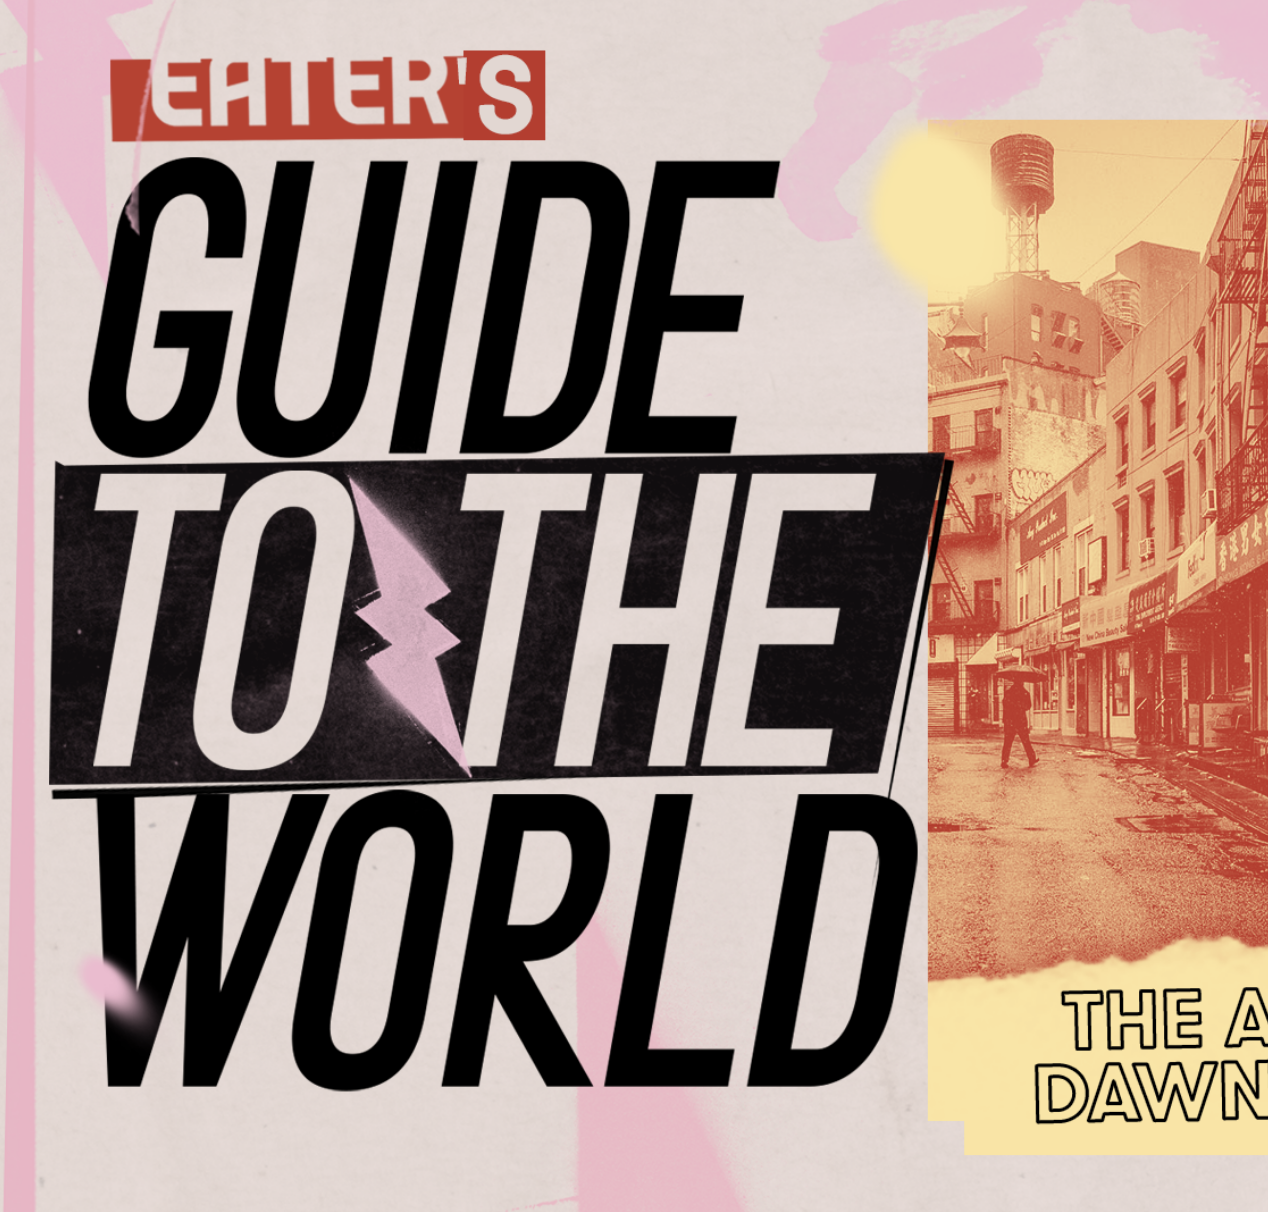 EATER’S GUIDE TO THE WORLD